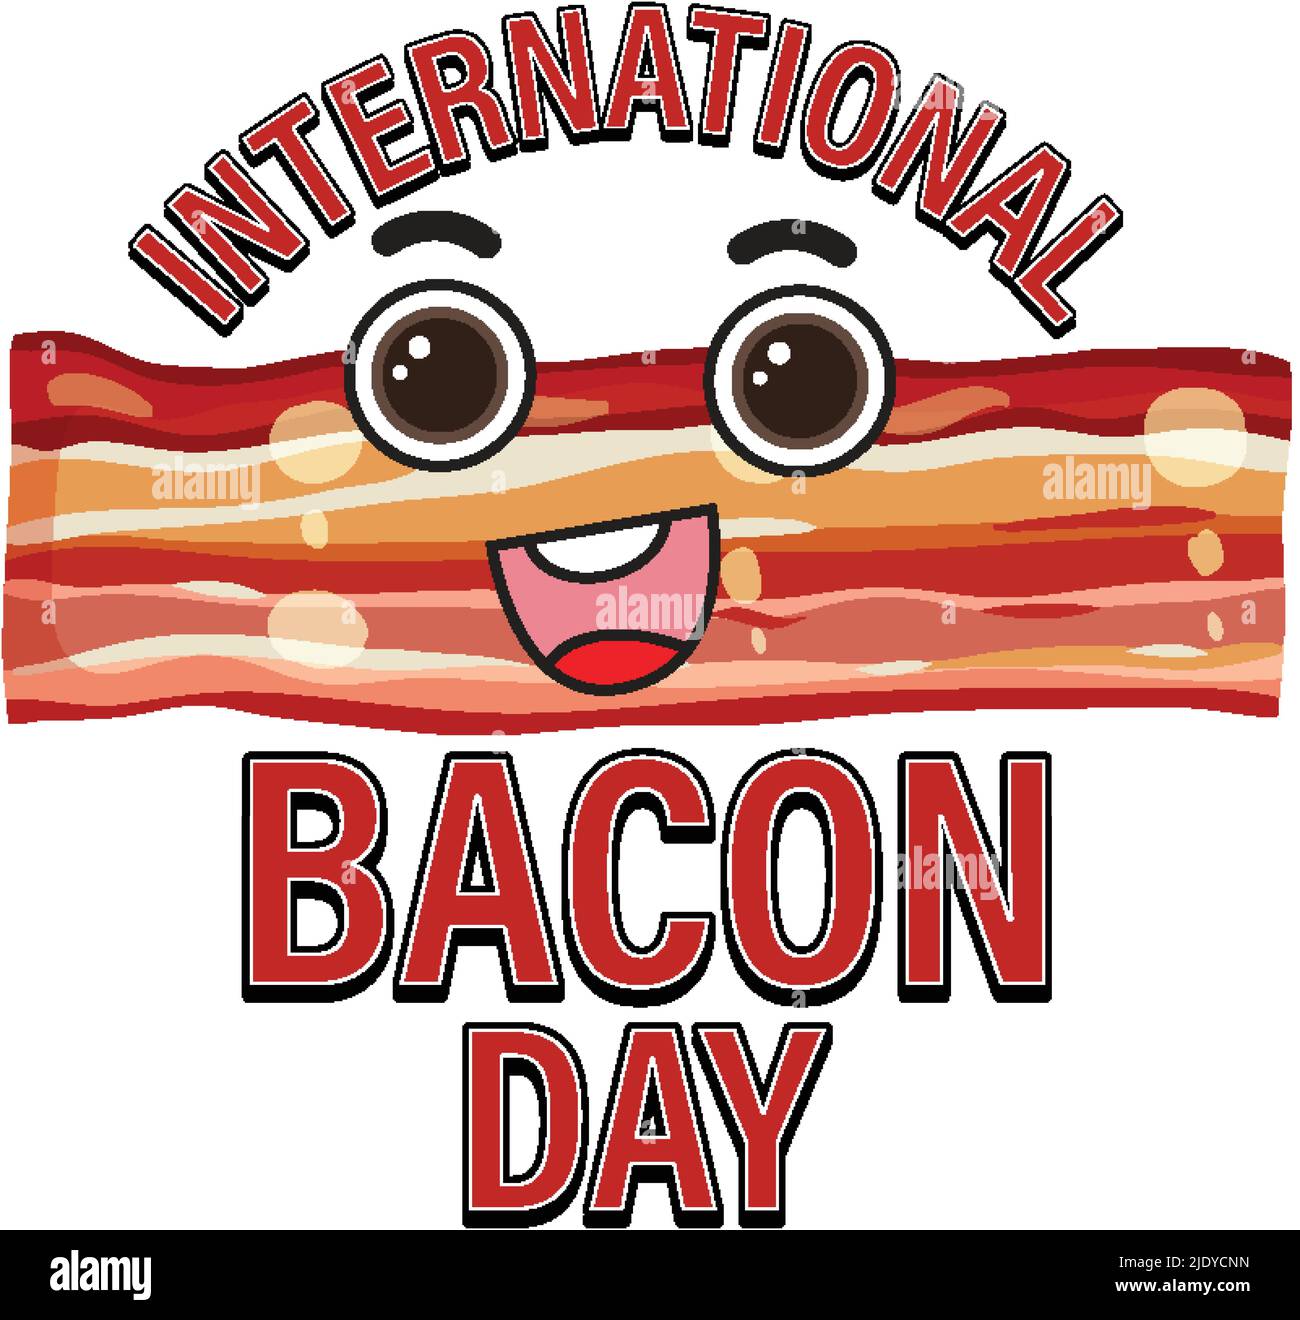 International bacon day poster template illustration Stock Vector Image